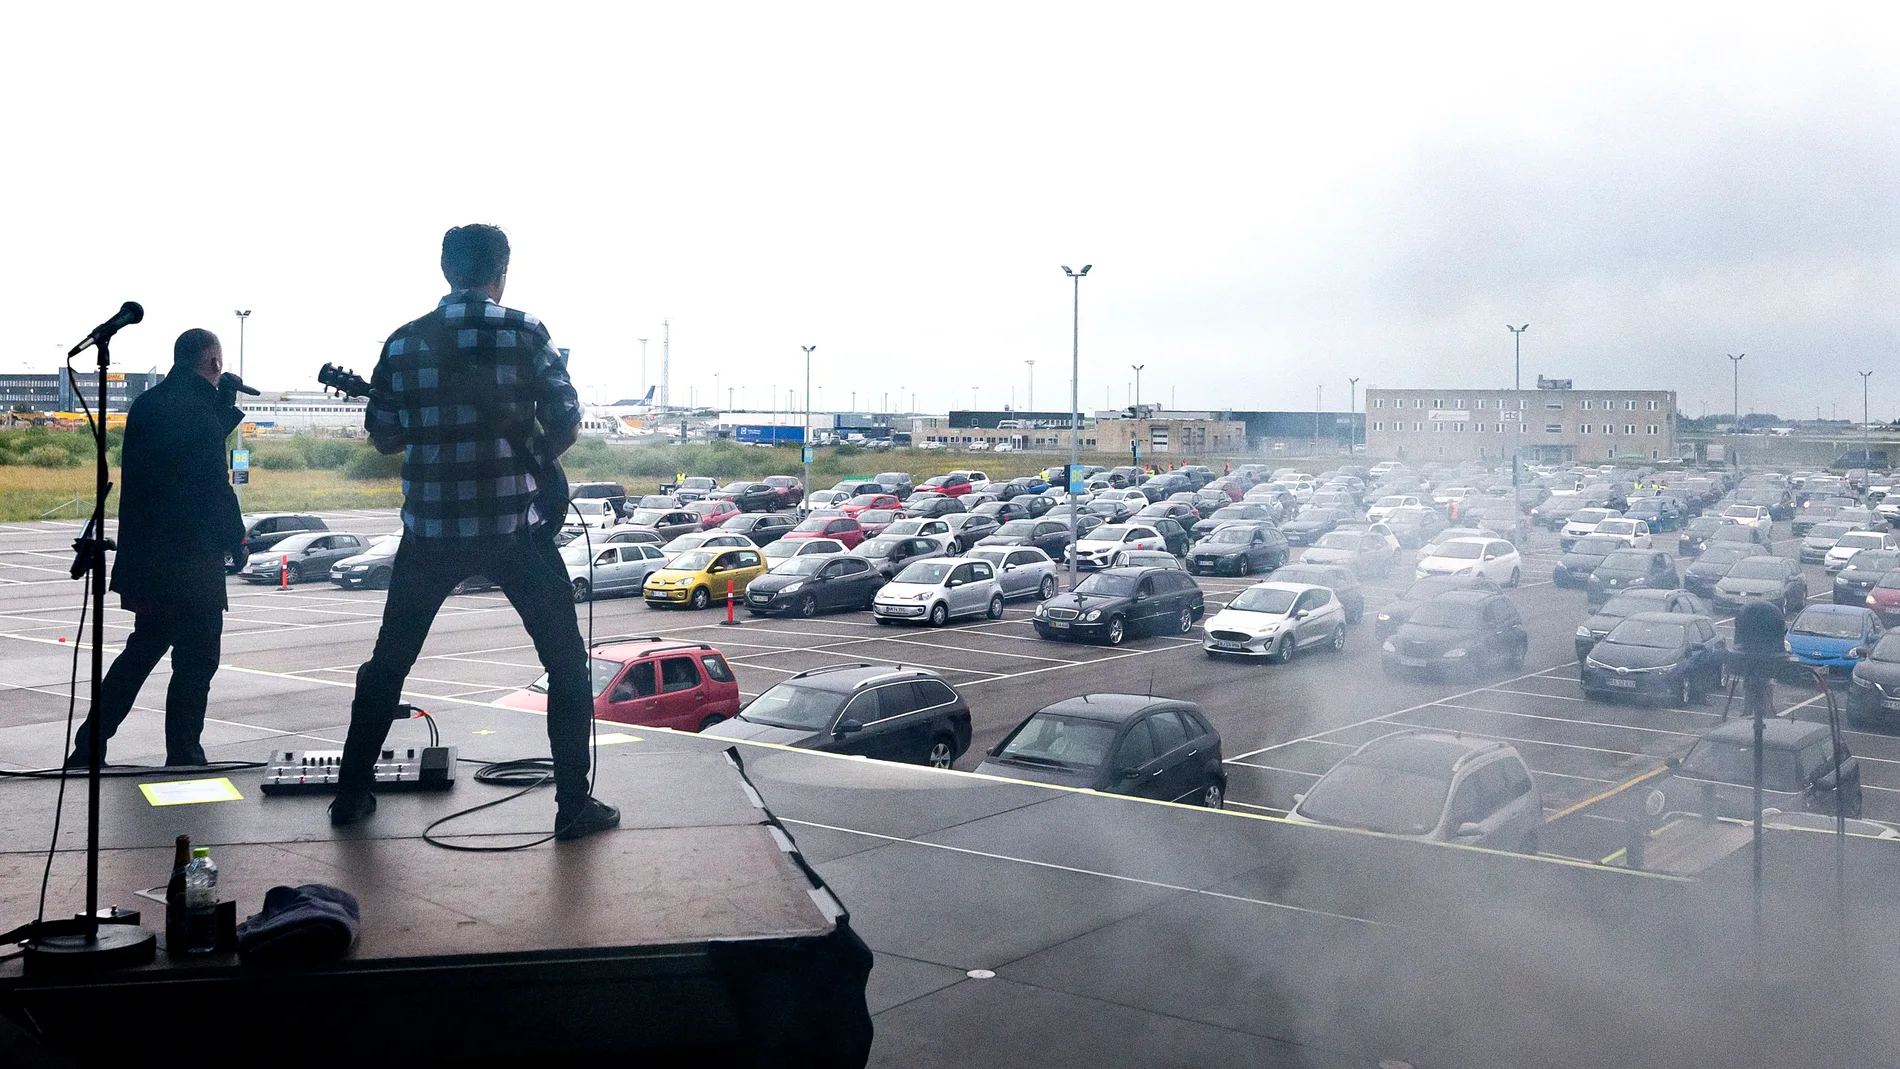 Liam O'Connor on stage in the parking lot of Copenhagen airport.